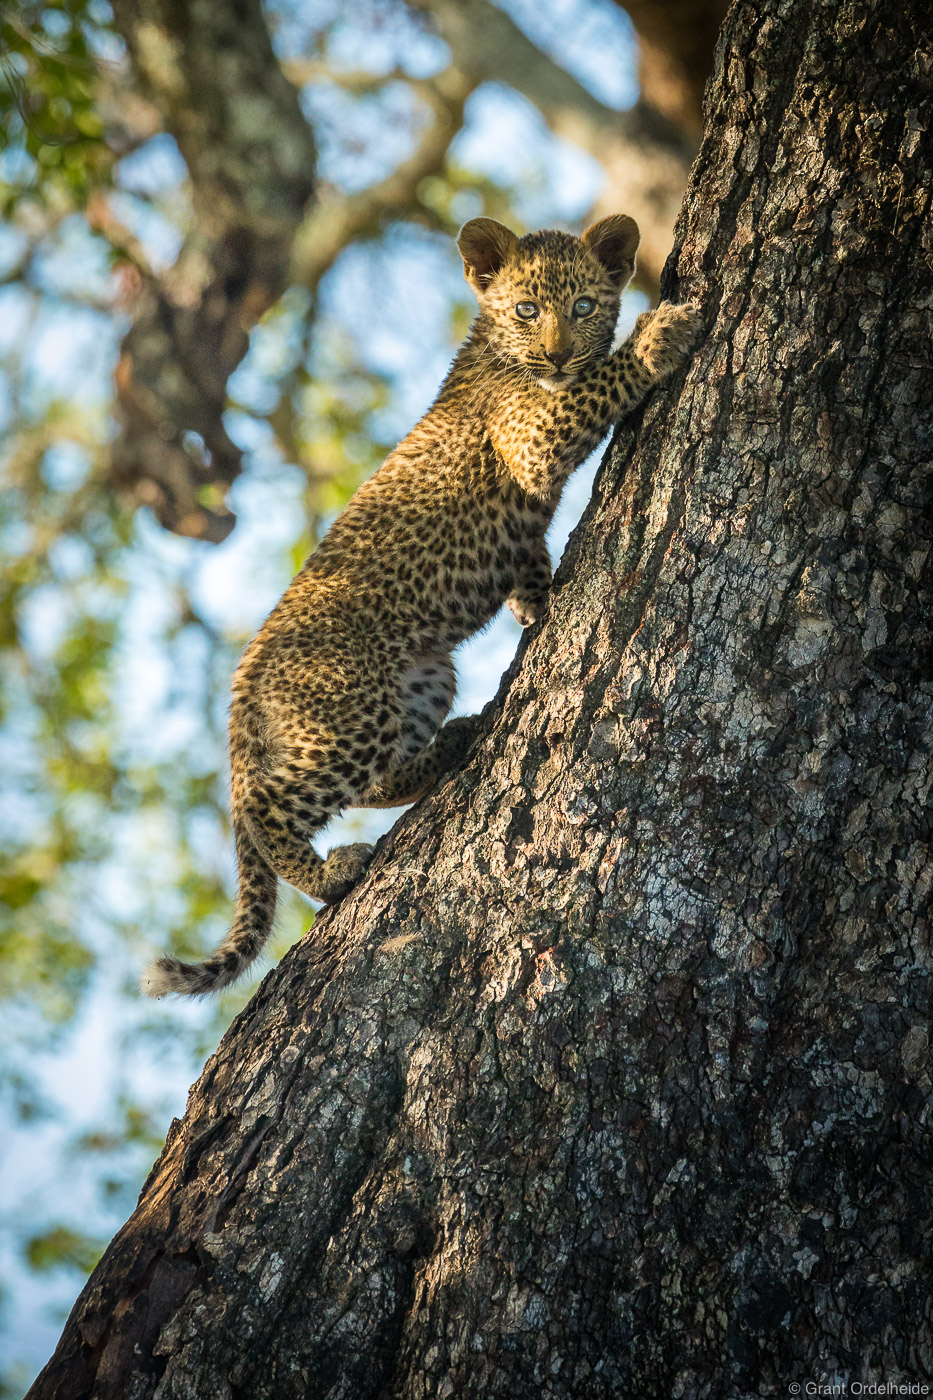 A ten-week-old leopard cub pauses while climbing a tree to get to his mother's impala kill.